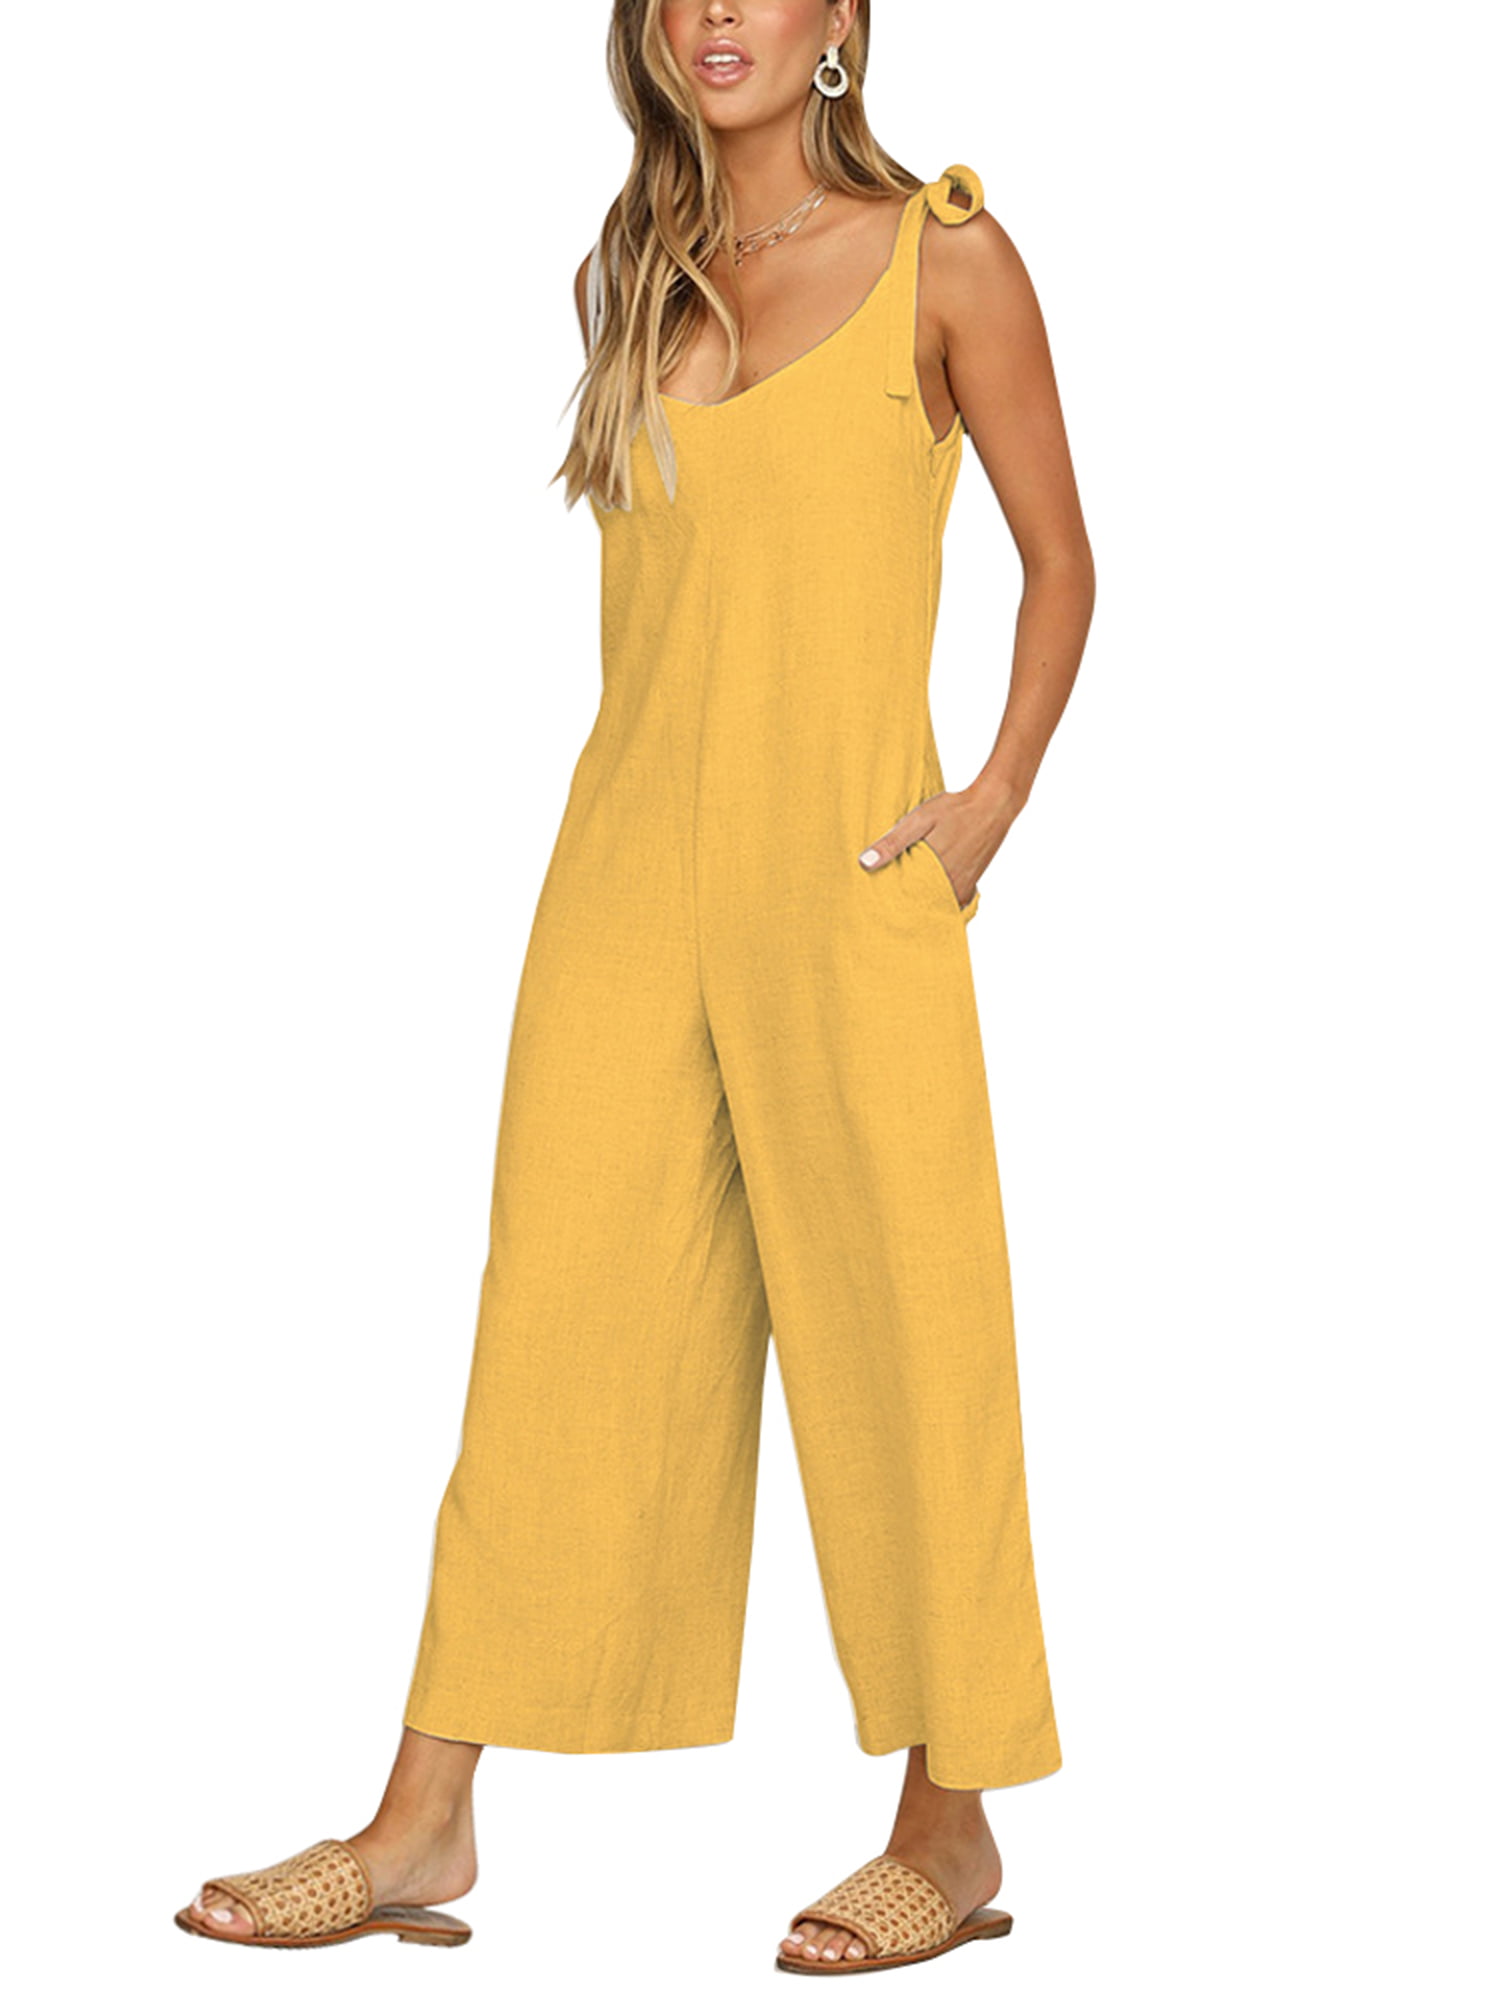 UUYUK Women Relaxed-Fit Casual Wide Leg Solid Color Jumpsuit 